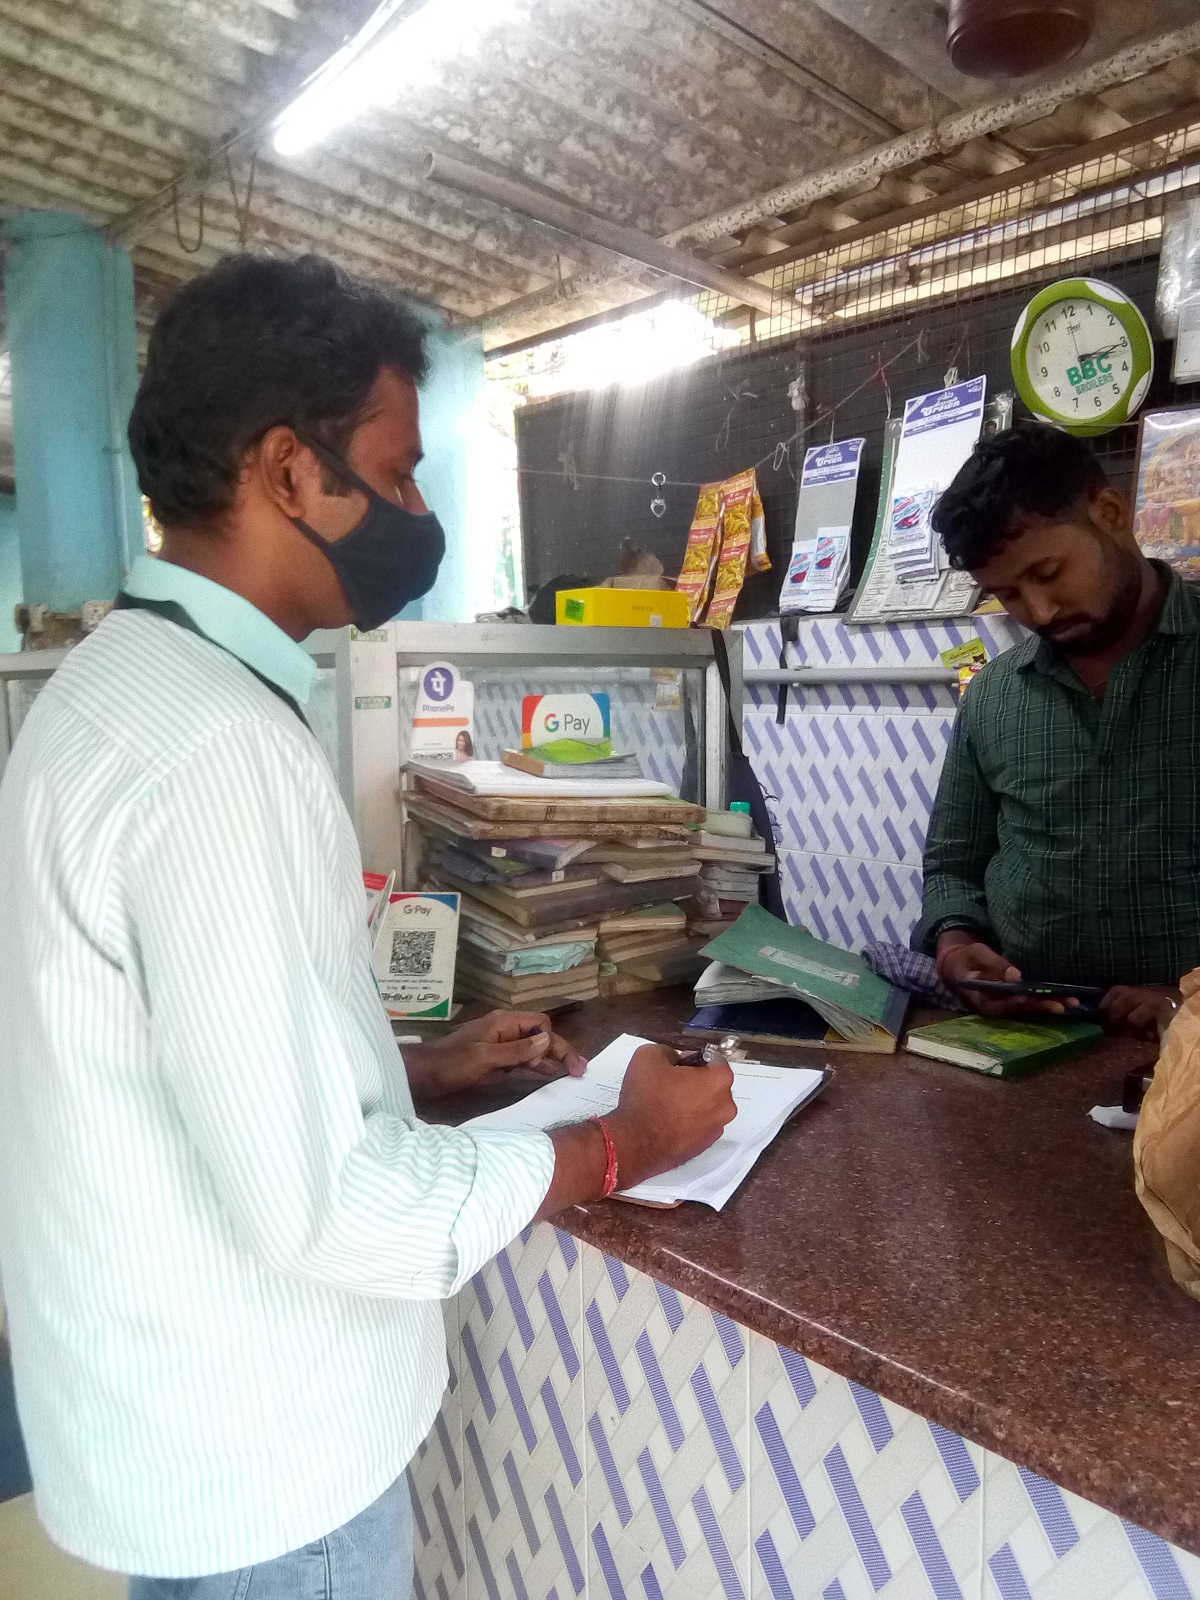 man at shop counter in mask, with another man looking at a mobile phone